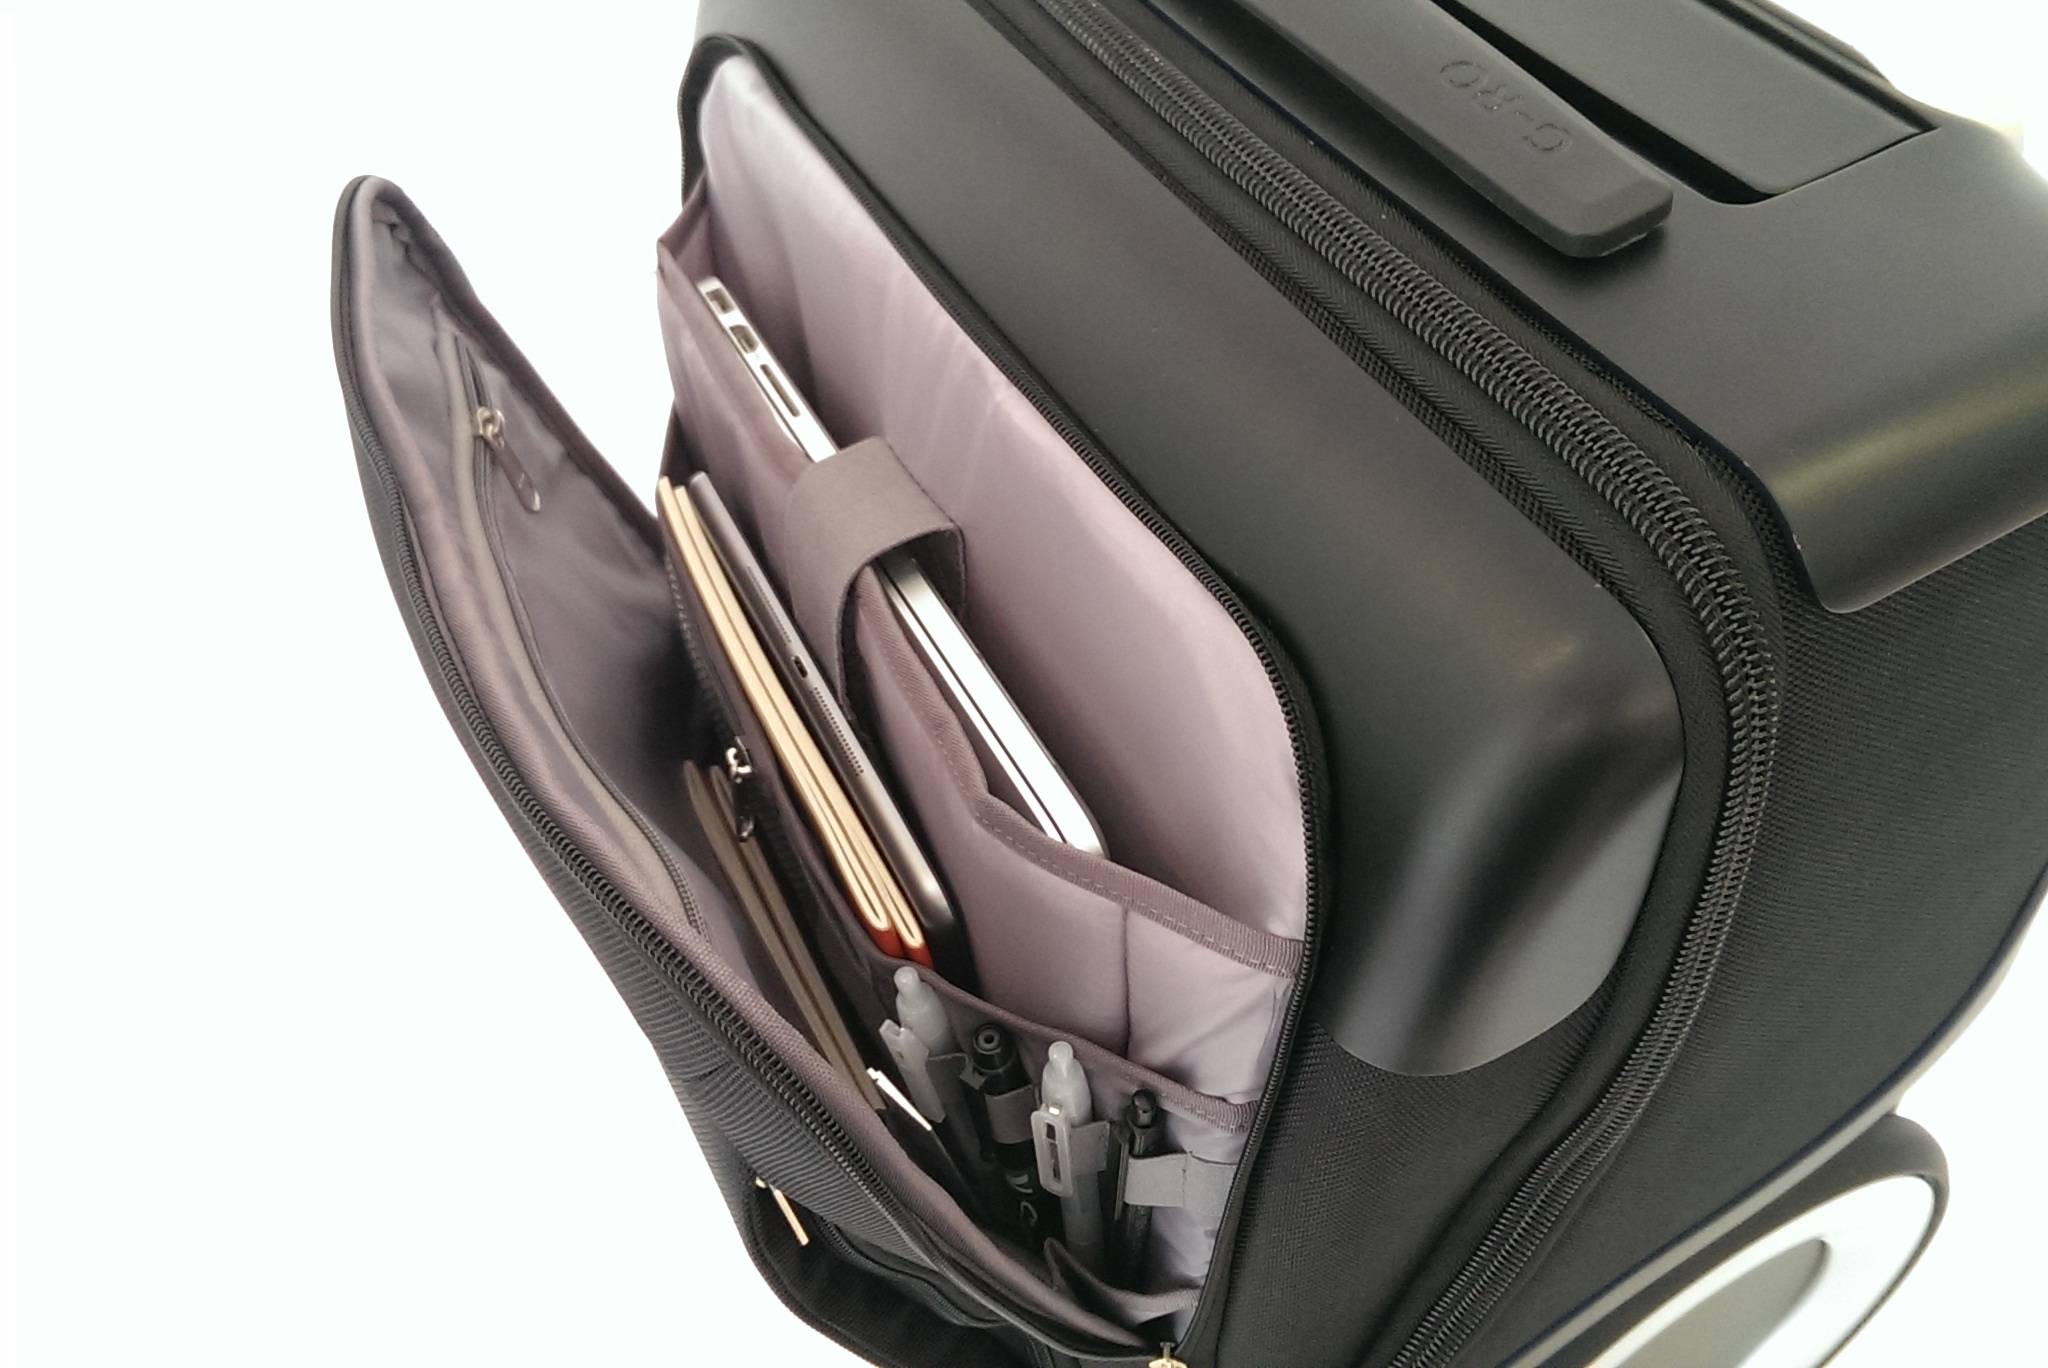 G-RO bags have lots of helpful features, like this work compartment. Photo: courtesy